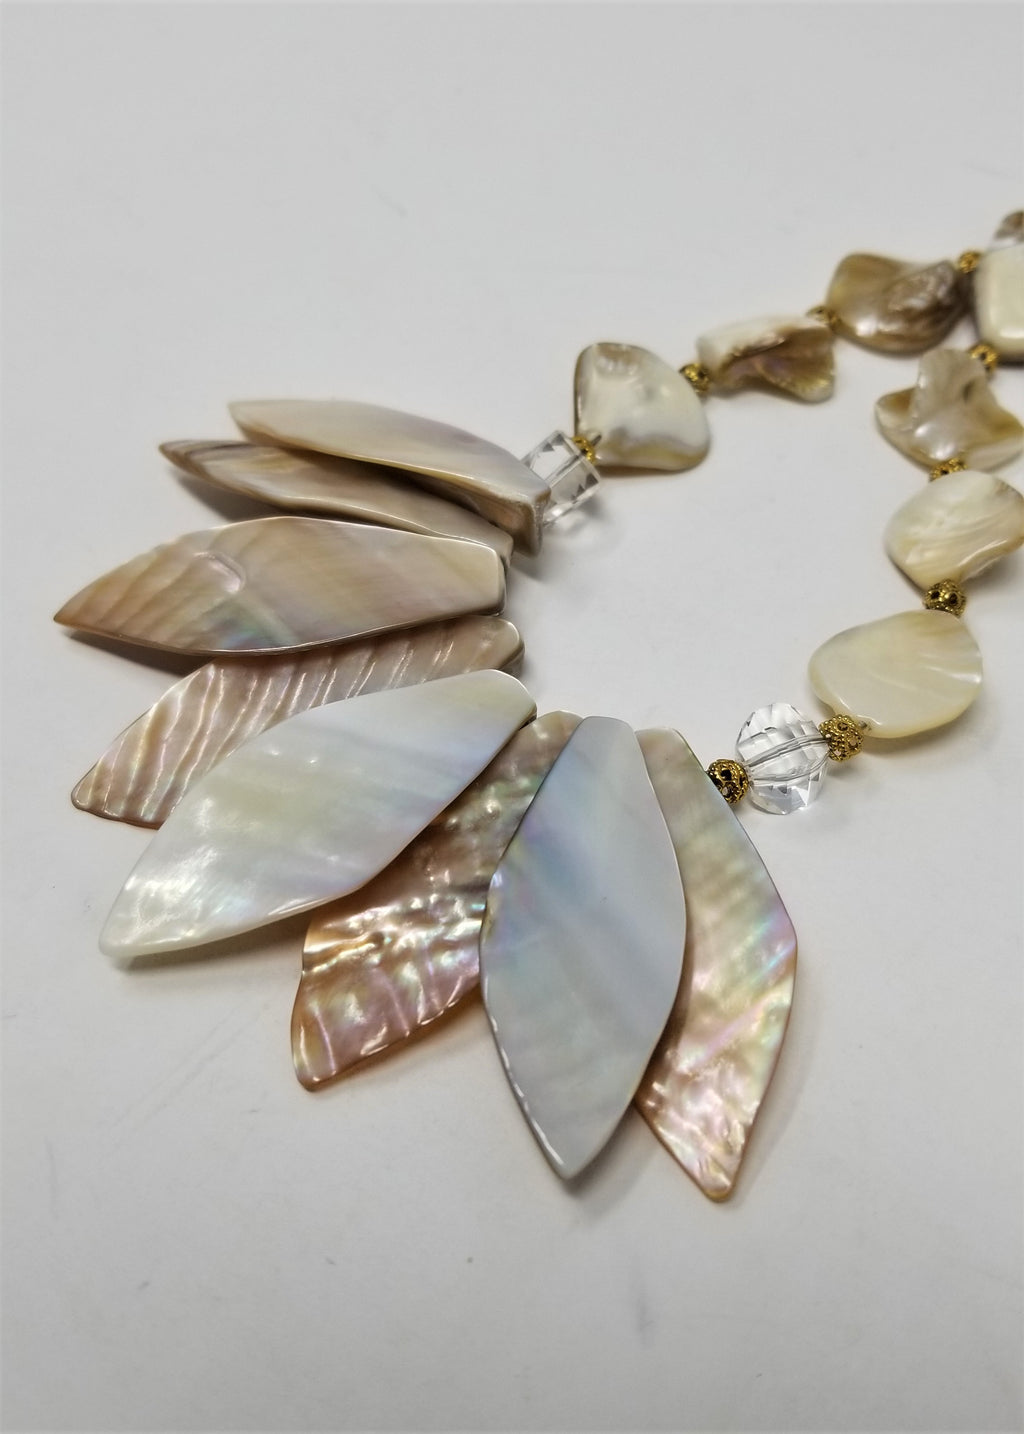 Stunning MOP Shell Necklace 16" Choker Lots of Luster